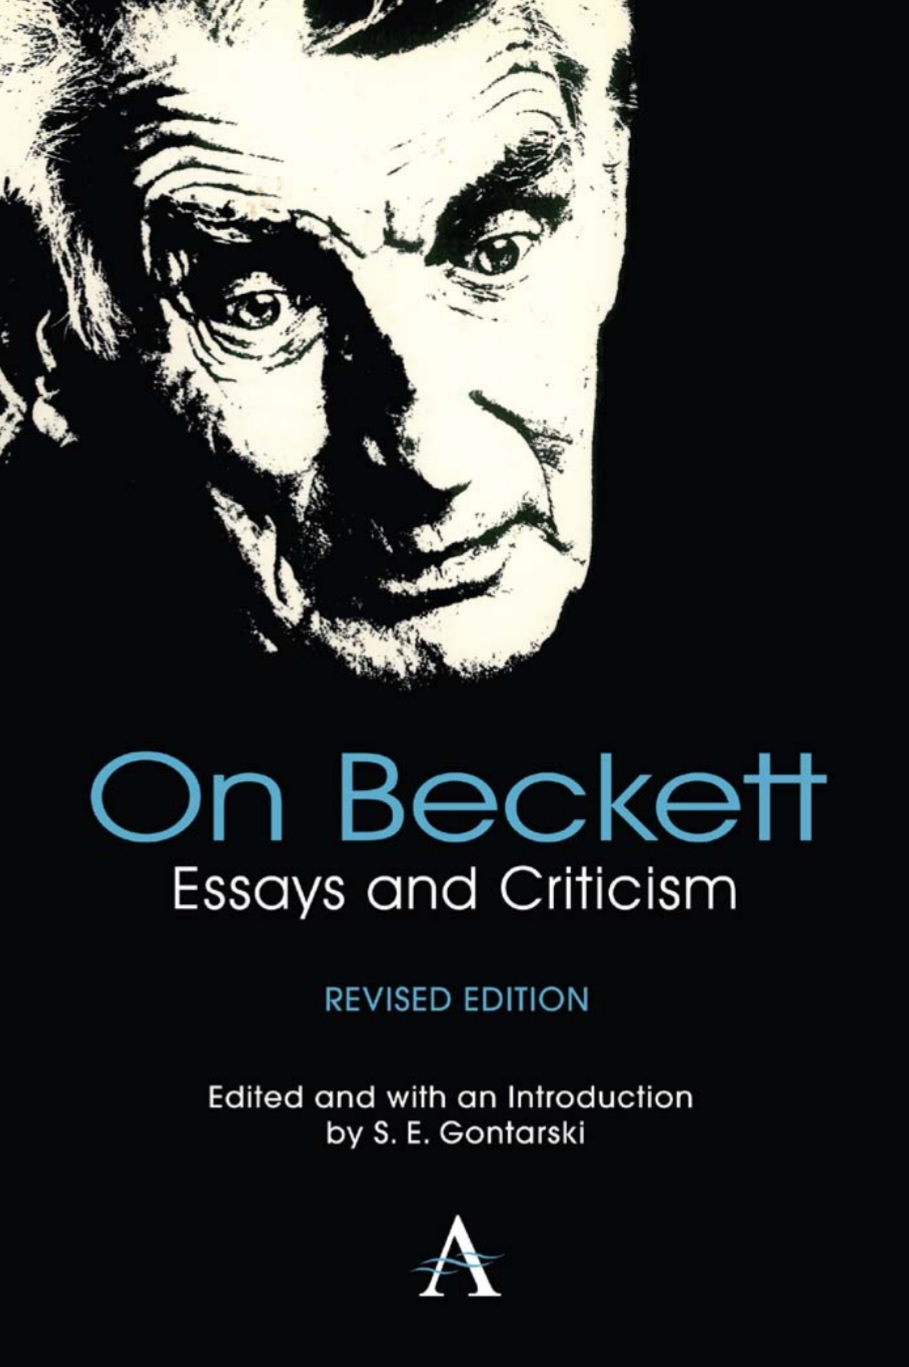 On-beckett-essays-and-criticism-theoryleaks.jpg